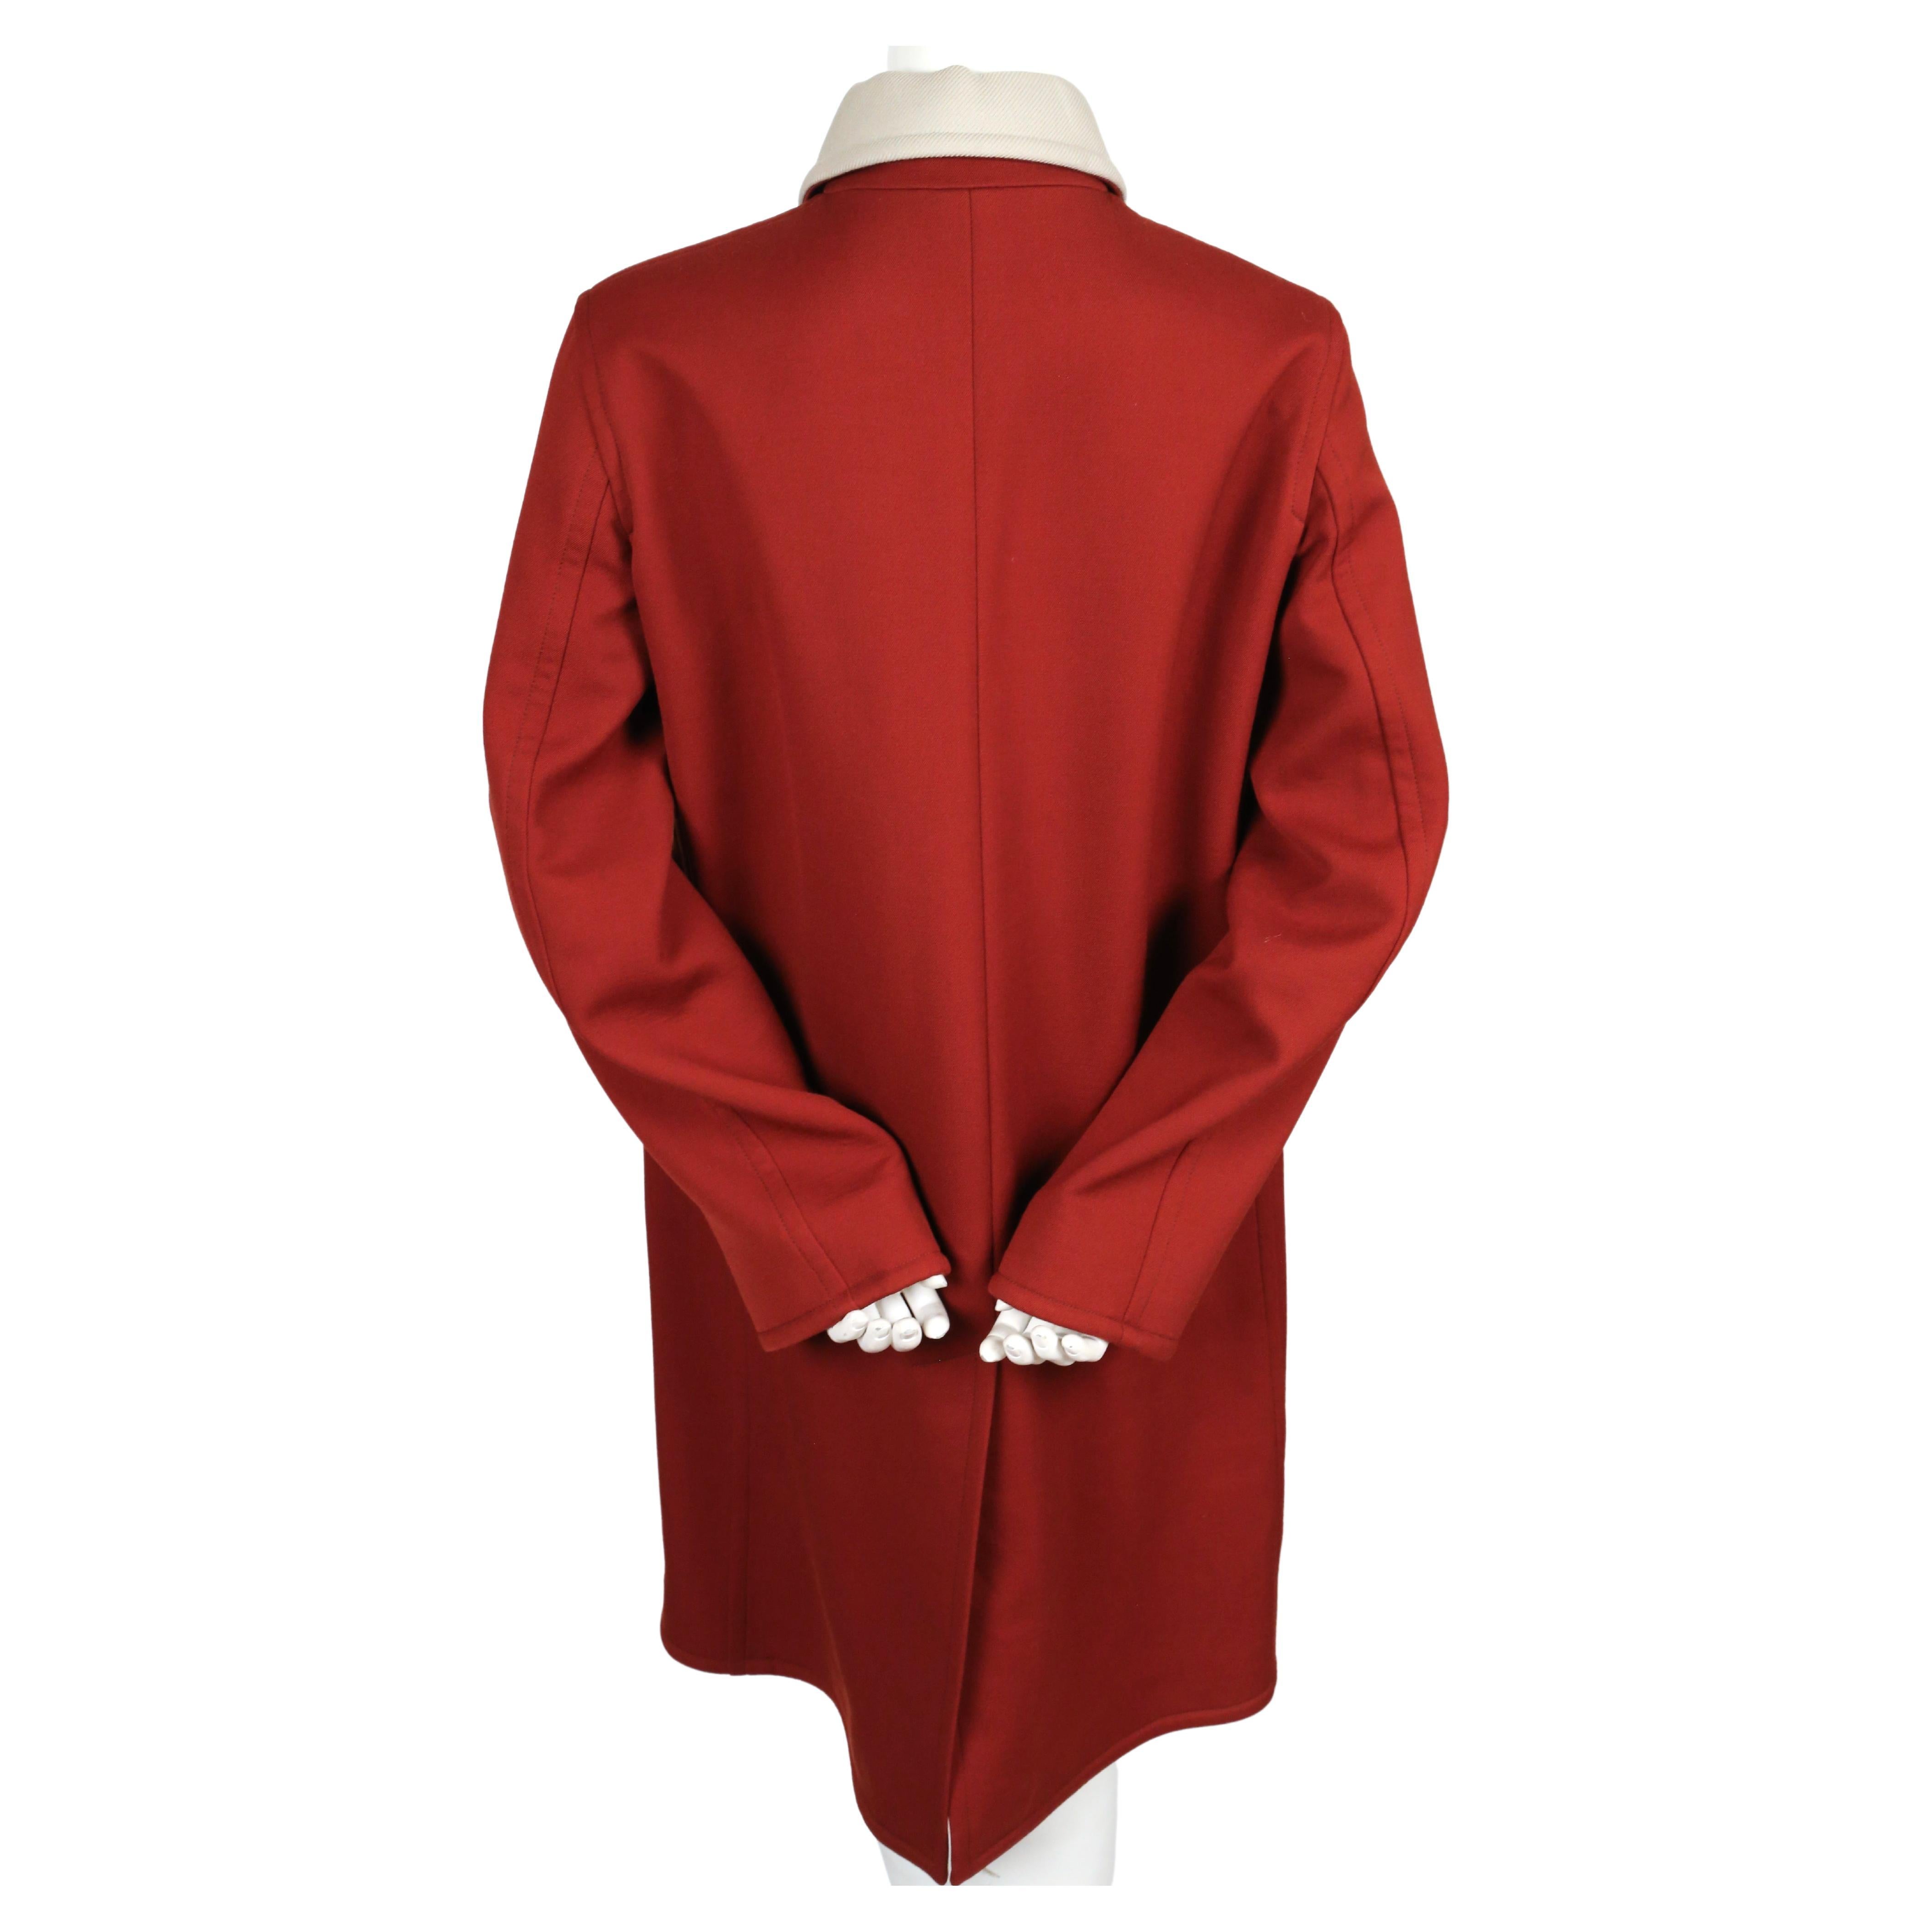 2015 CELINE by PHOEBE PHILO wool coat with O-ring zipper For Sale 2